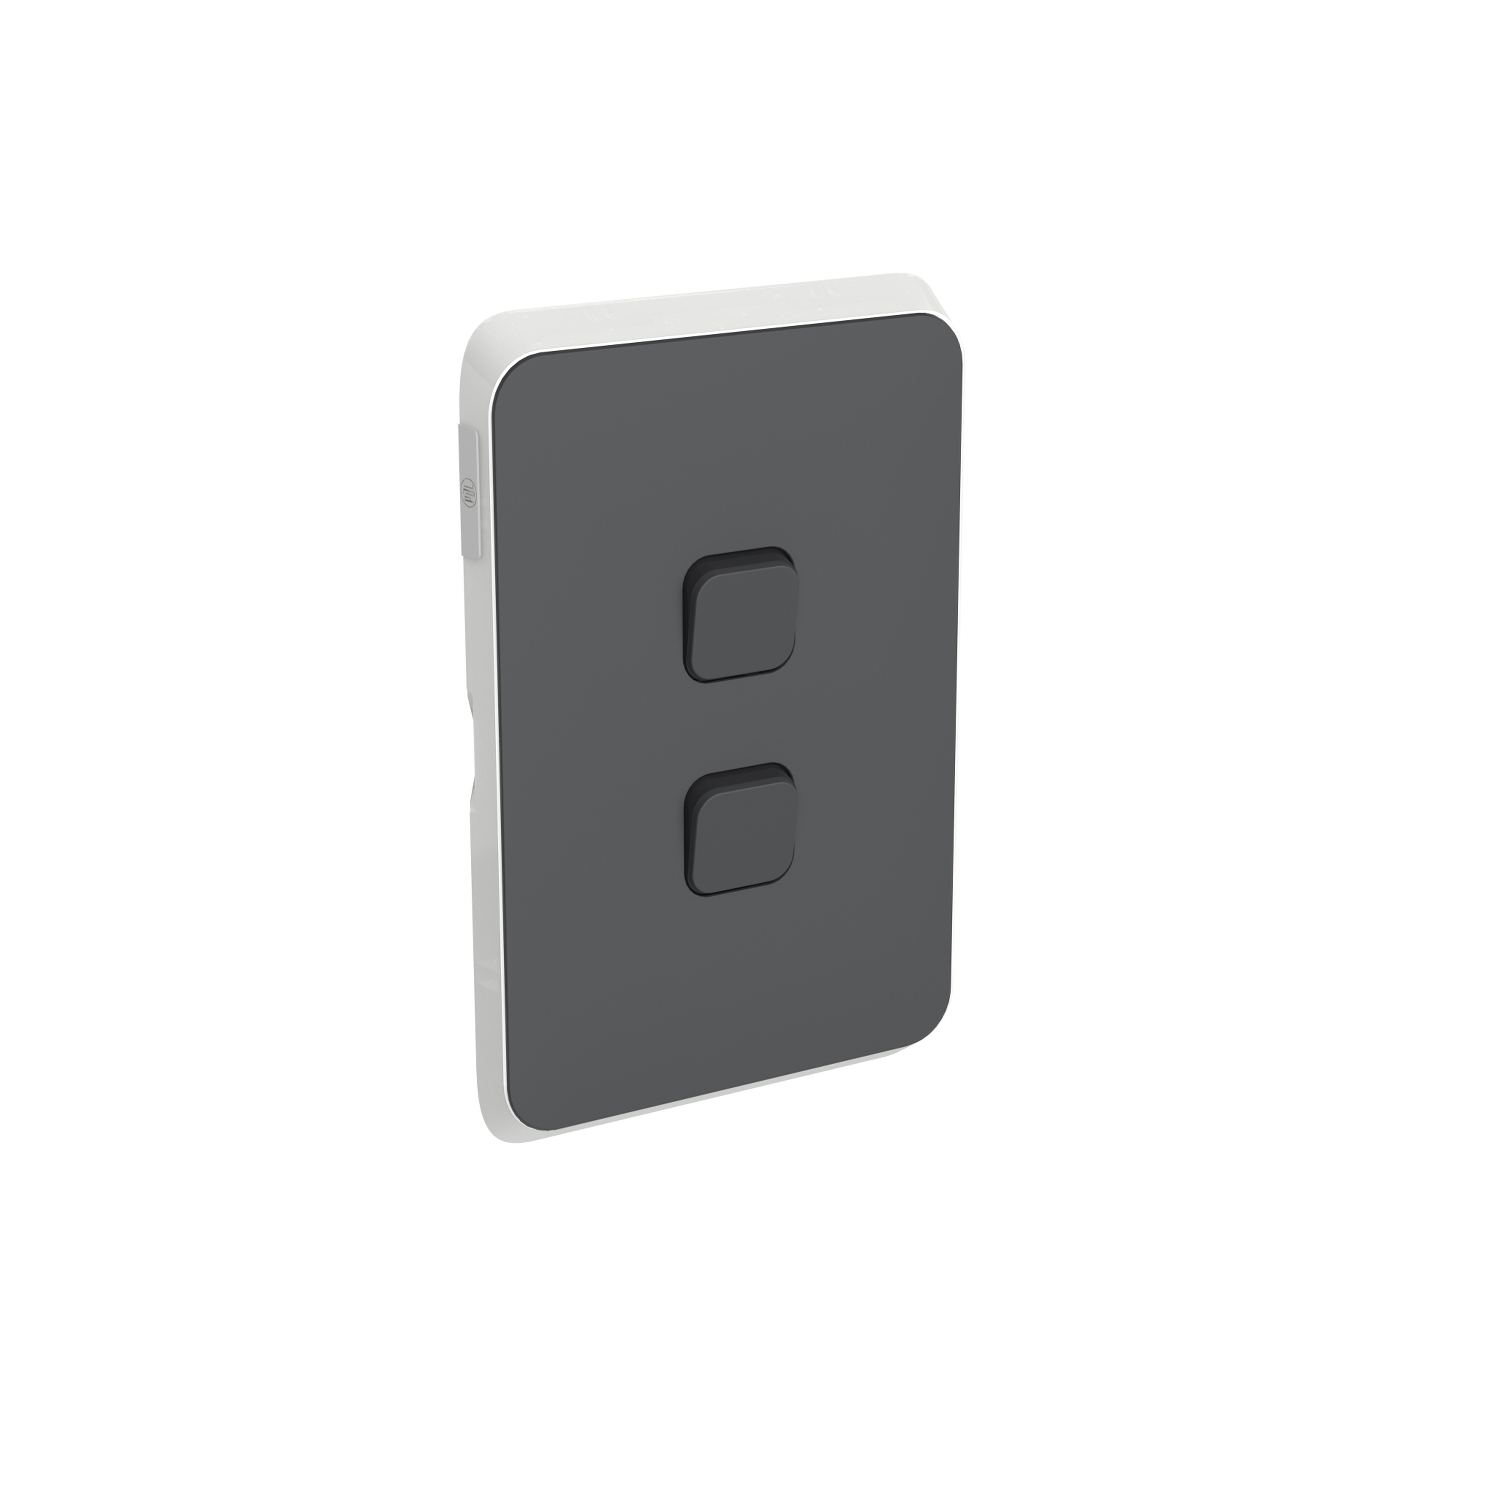 PDL382C-AN - PDL Iconic Cover Plate Switch 2Gang - Anthracite